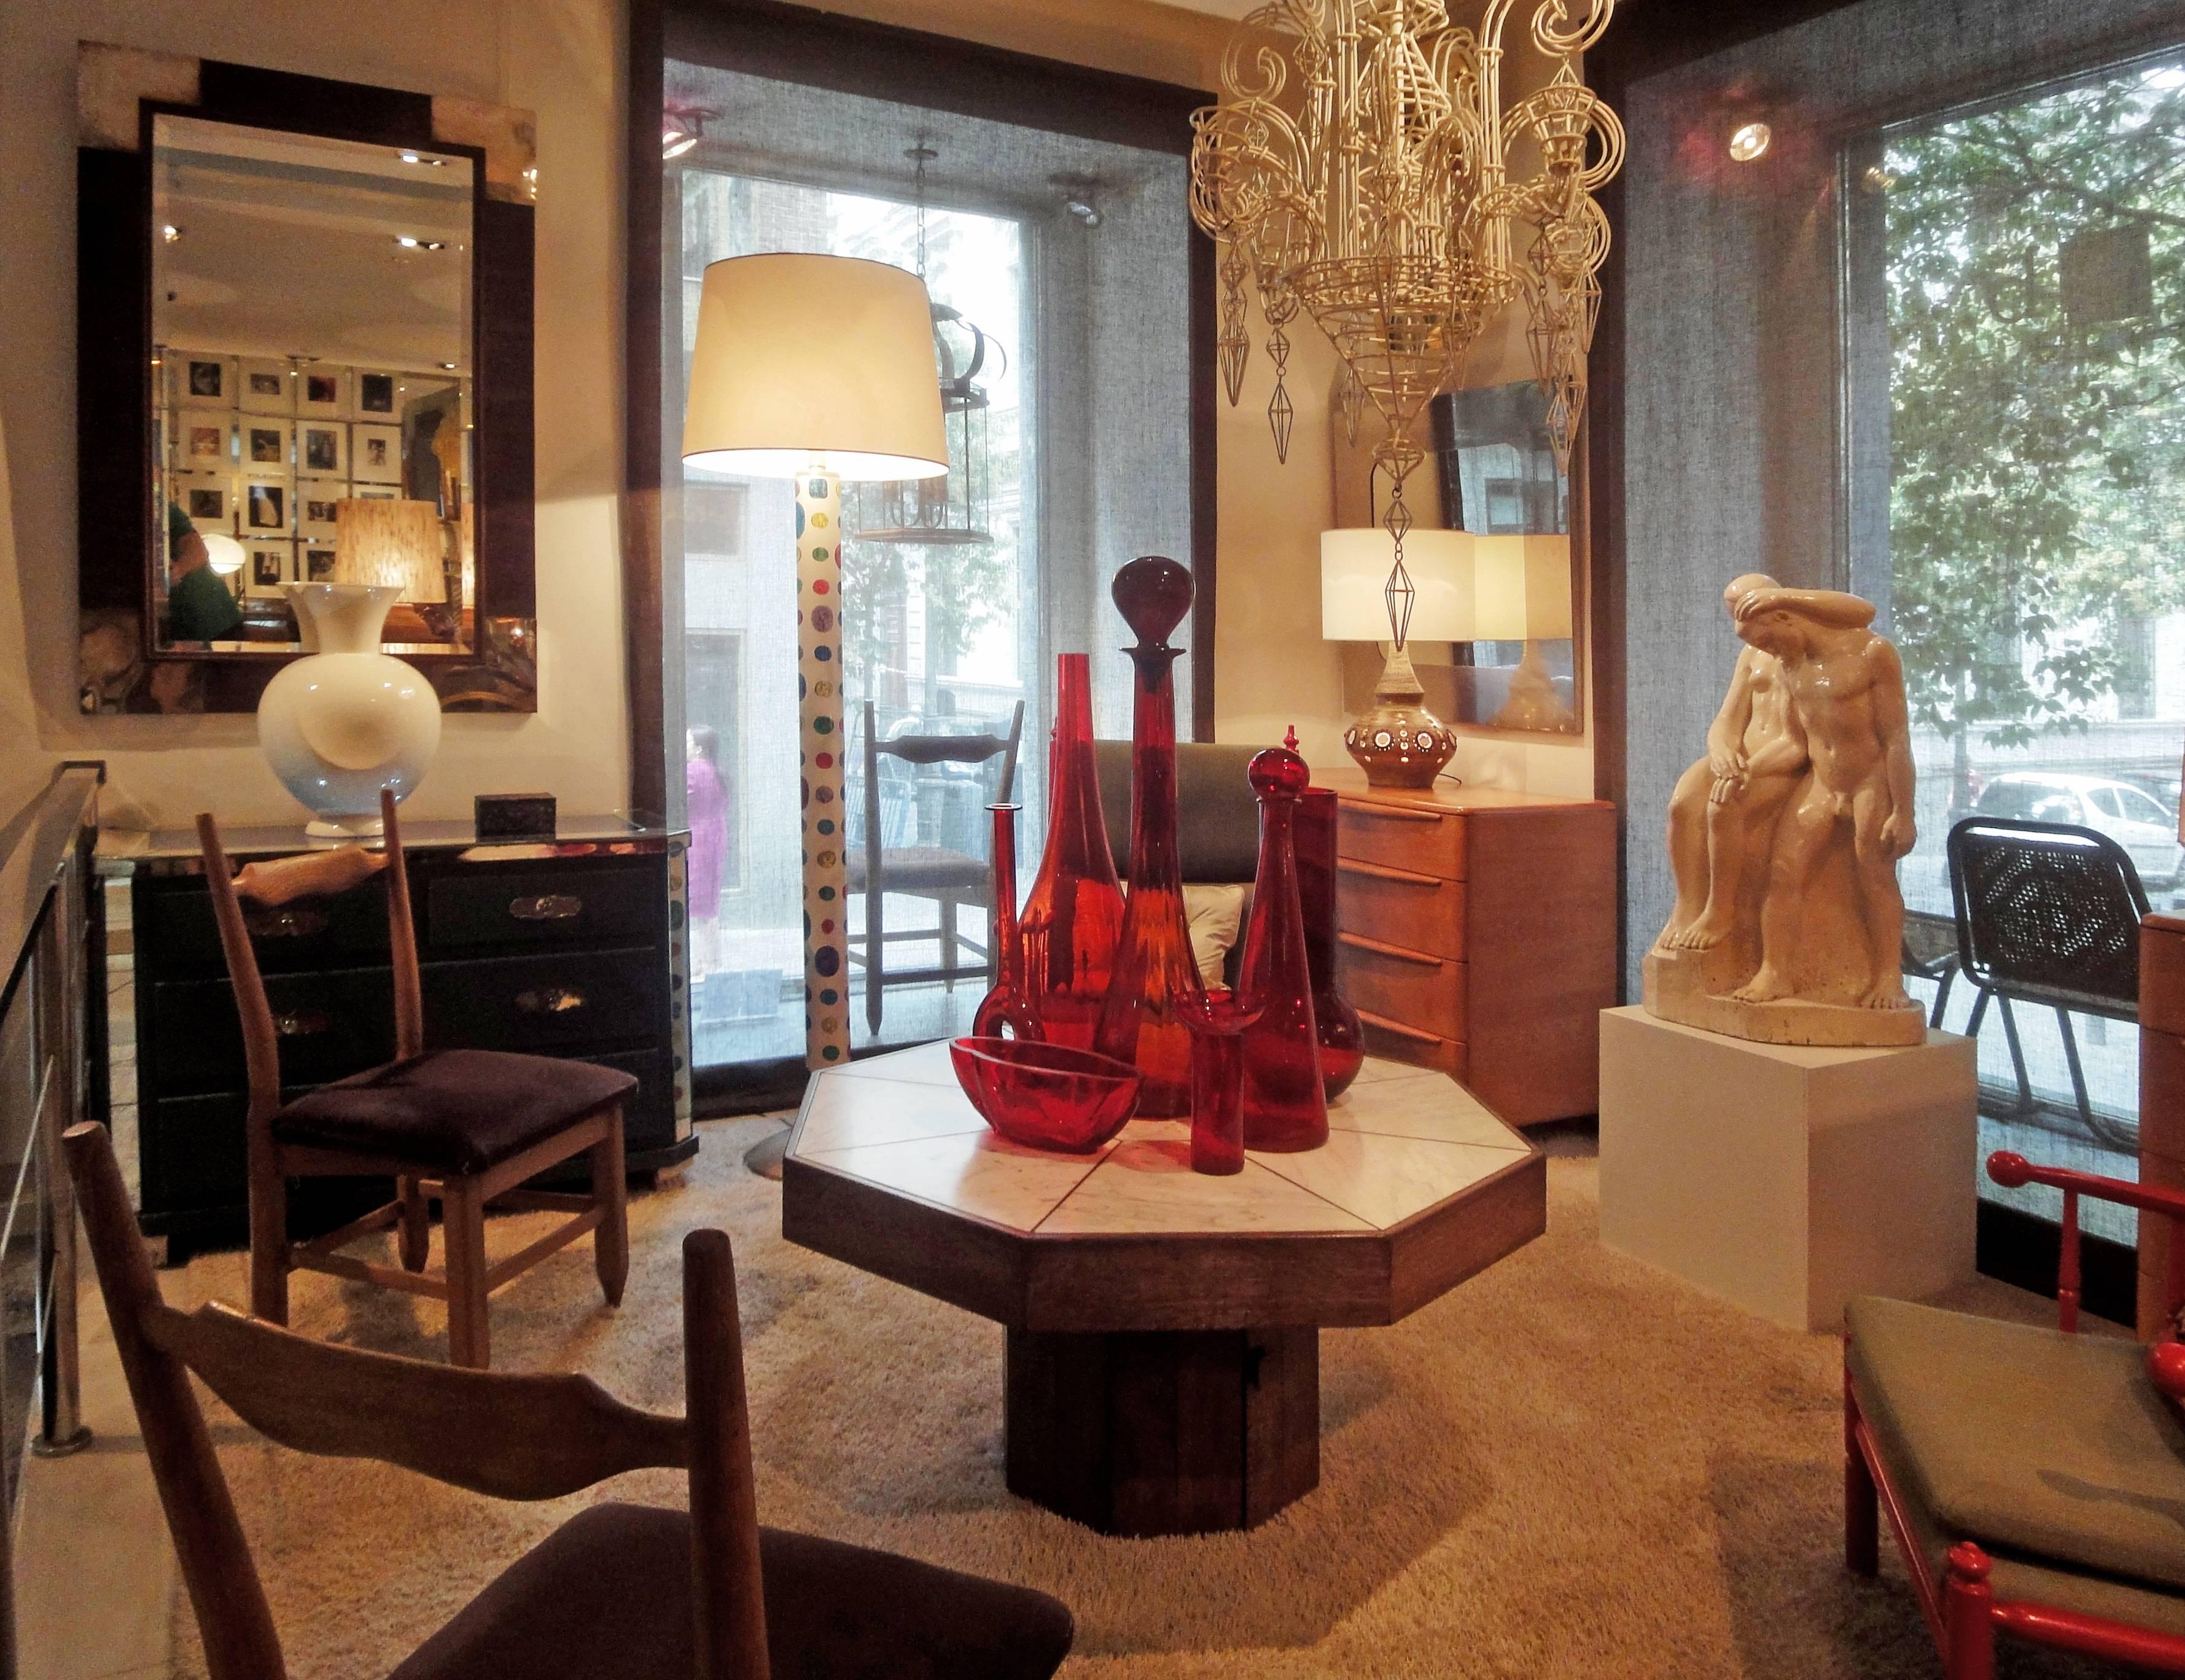 A large floor lamp from the “Cammei” series by Piero Fornasetti.
Polychromed-cameos silk-screen-printed on metal.
 